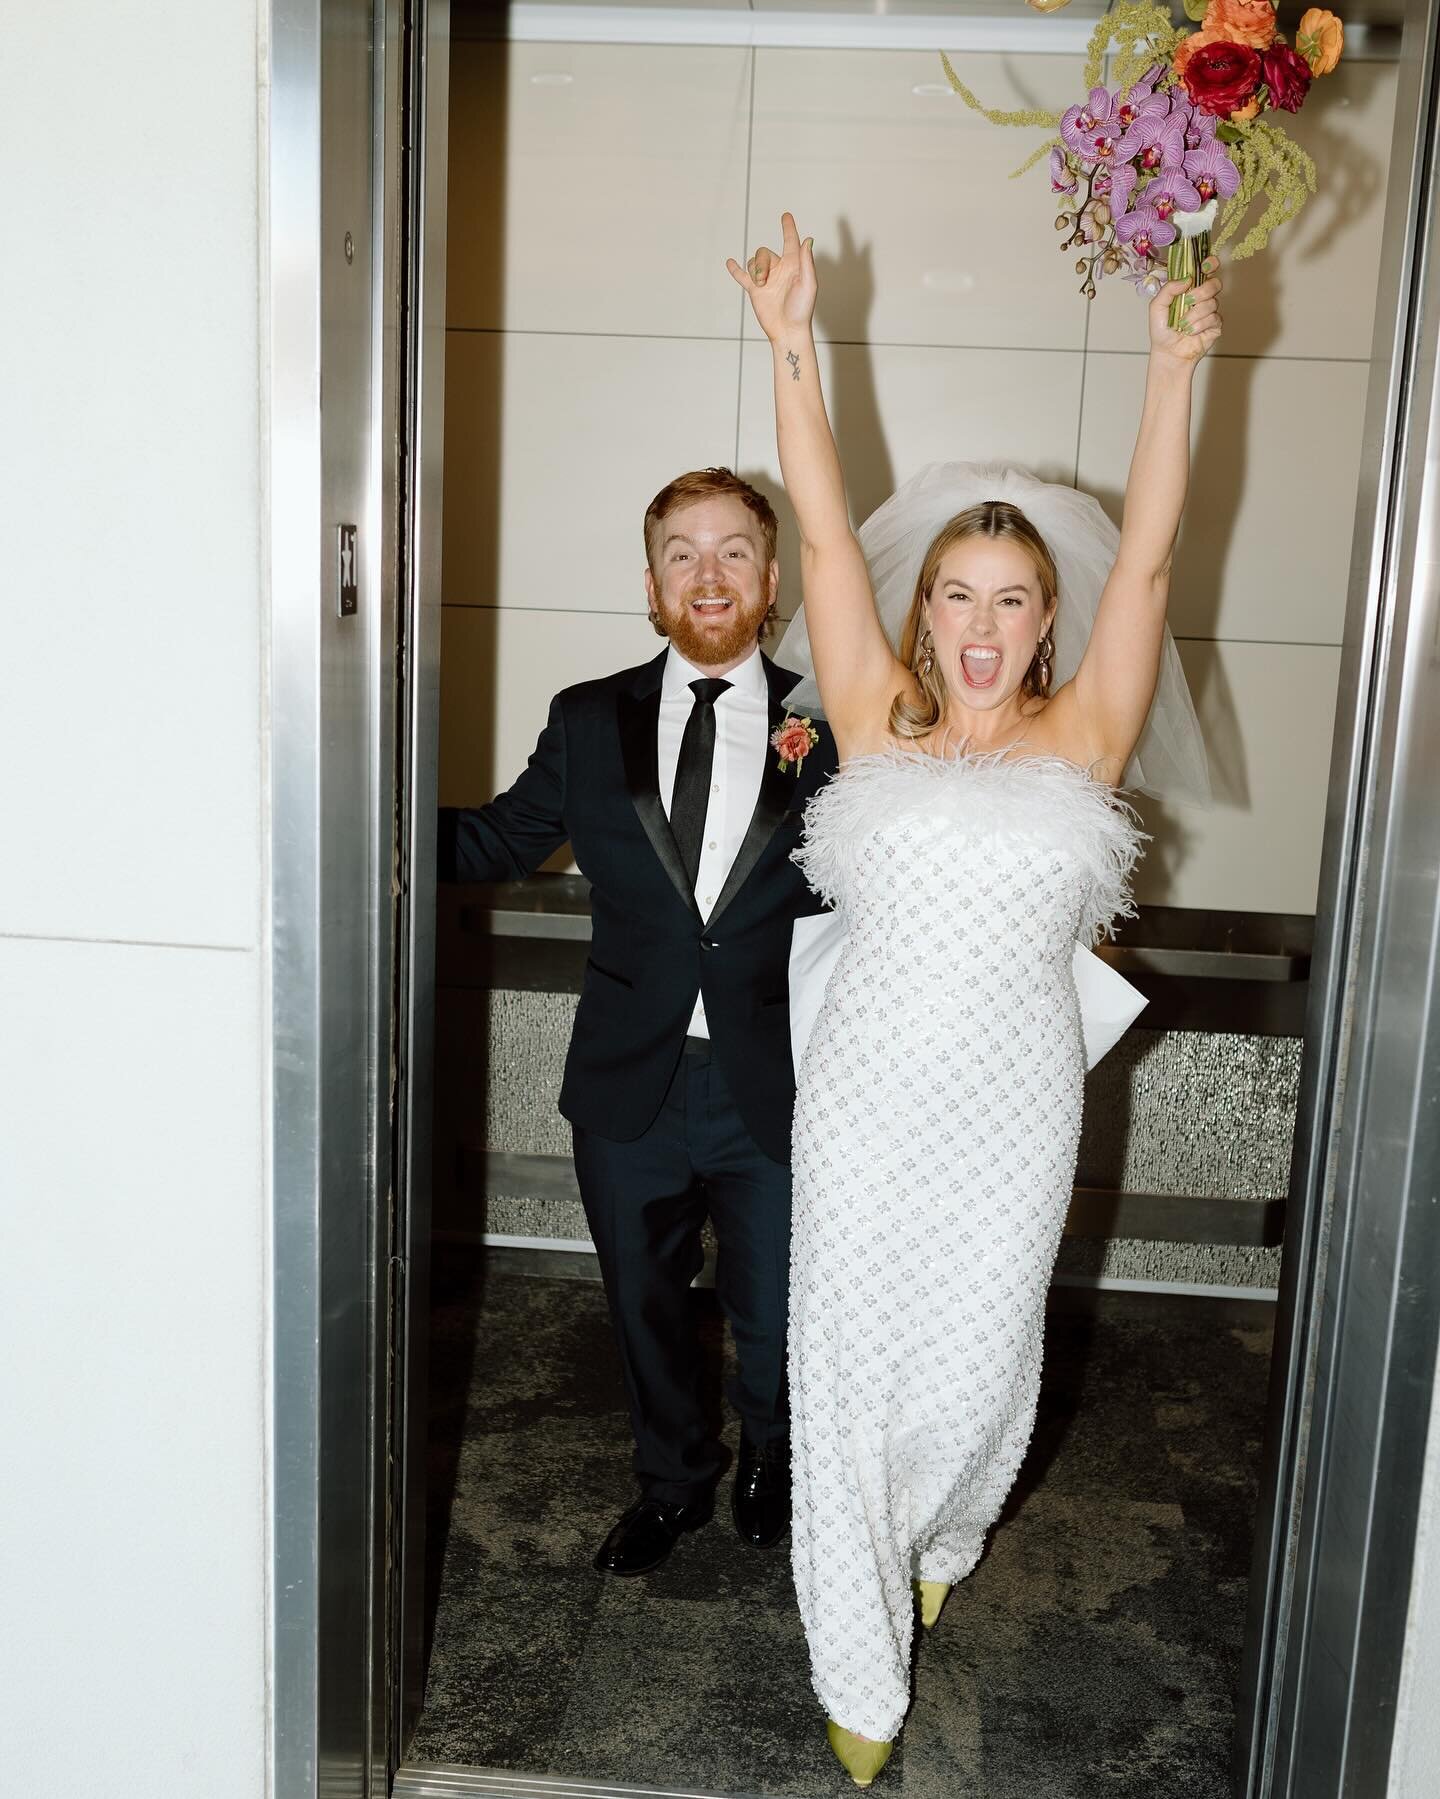 Such a fun and colorful wedding at @hotelvalleyho for Wesley and Keith&rsquo;s wedding! 🧡💚

Venue: @hotelvalleyho 
Photo: @valphotoco 
Floral: @harperfloralco 
Hair: @phillyhair 
Makeup: @sophglams 
Dress: @rebeccavallance 
Cake: @pjcakesaz 

#wedd